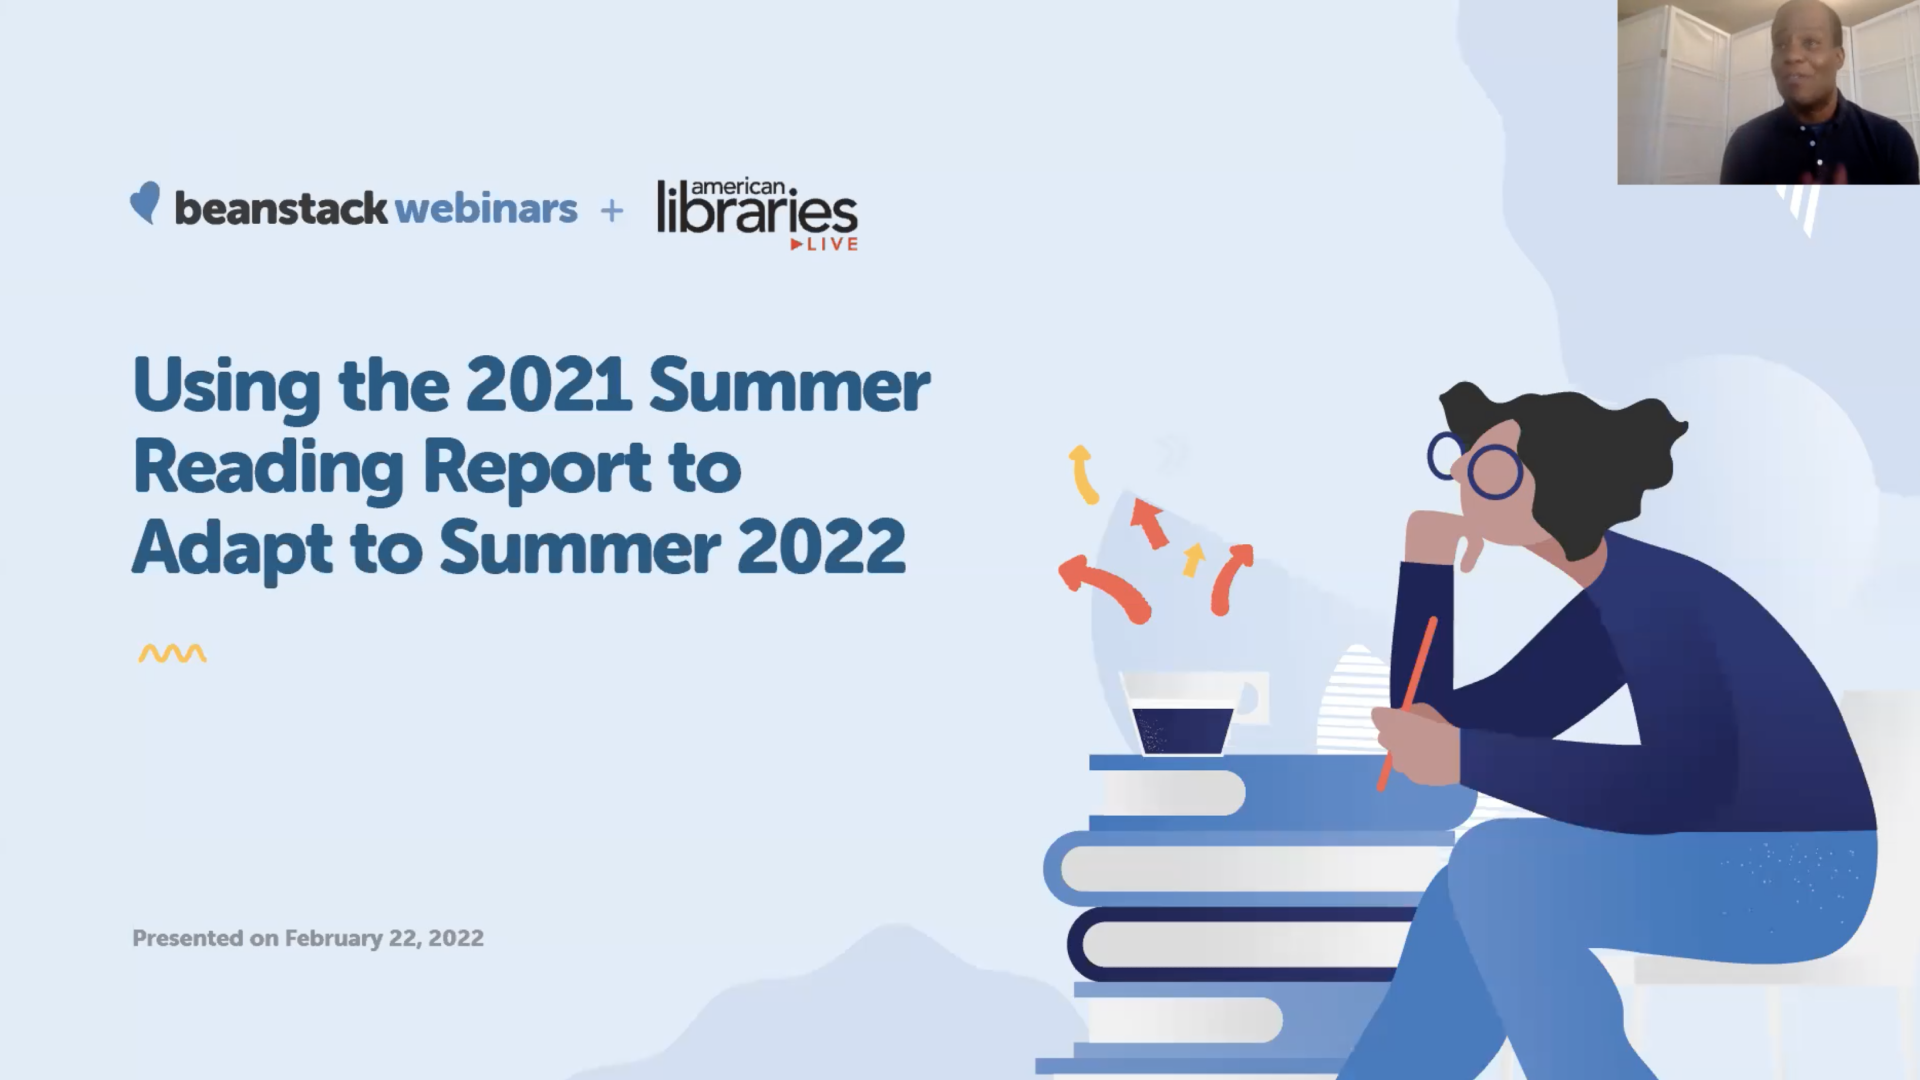 Using the 2021 Summer Reading Report to Adapt to Summer 2022